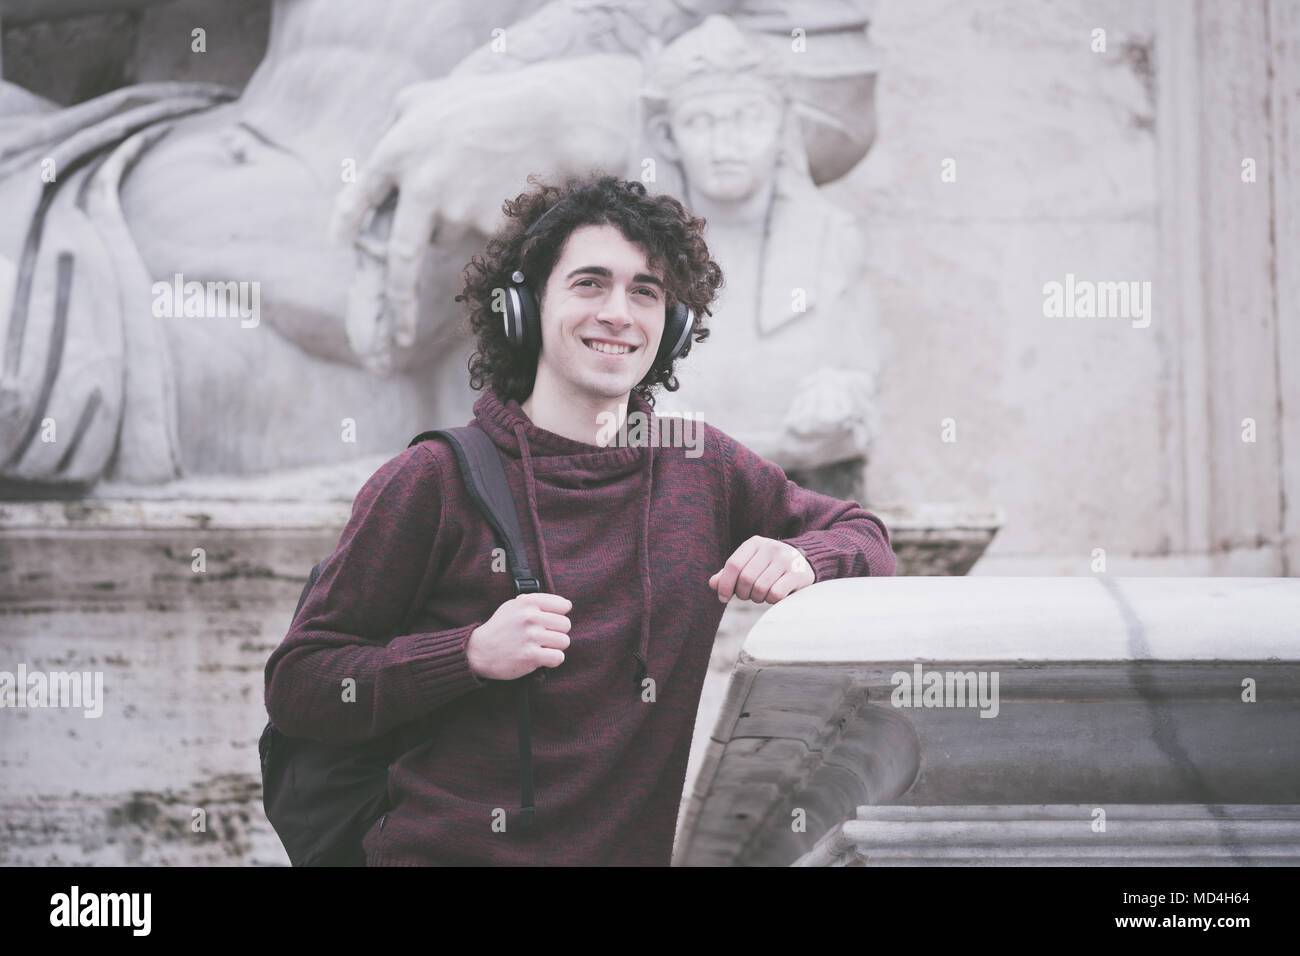 Vintage looking image of handsome young man with curly hair and headphones on his head listening the music Stock Photo